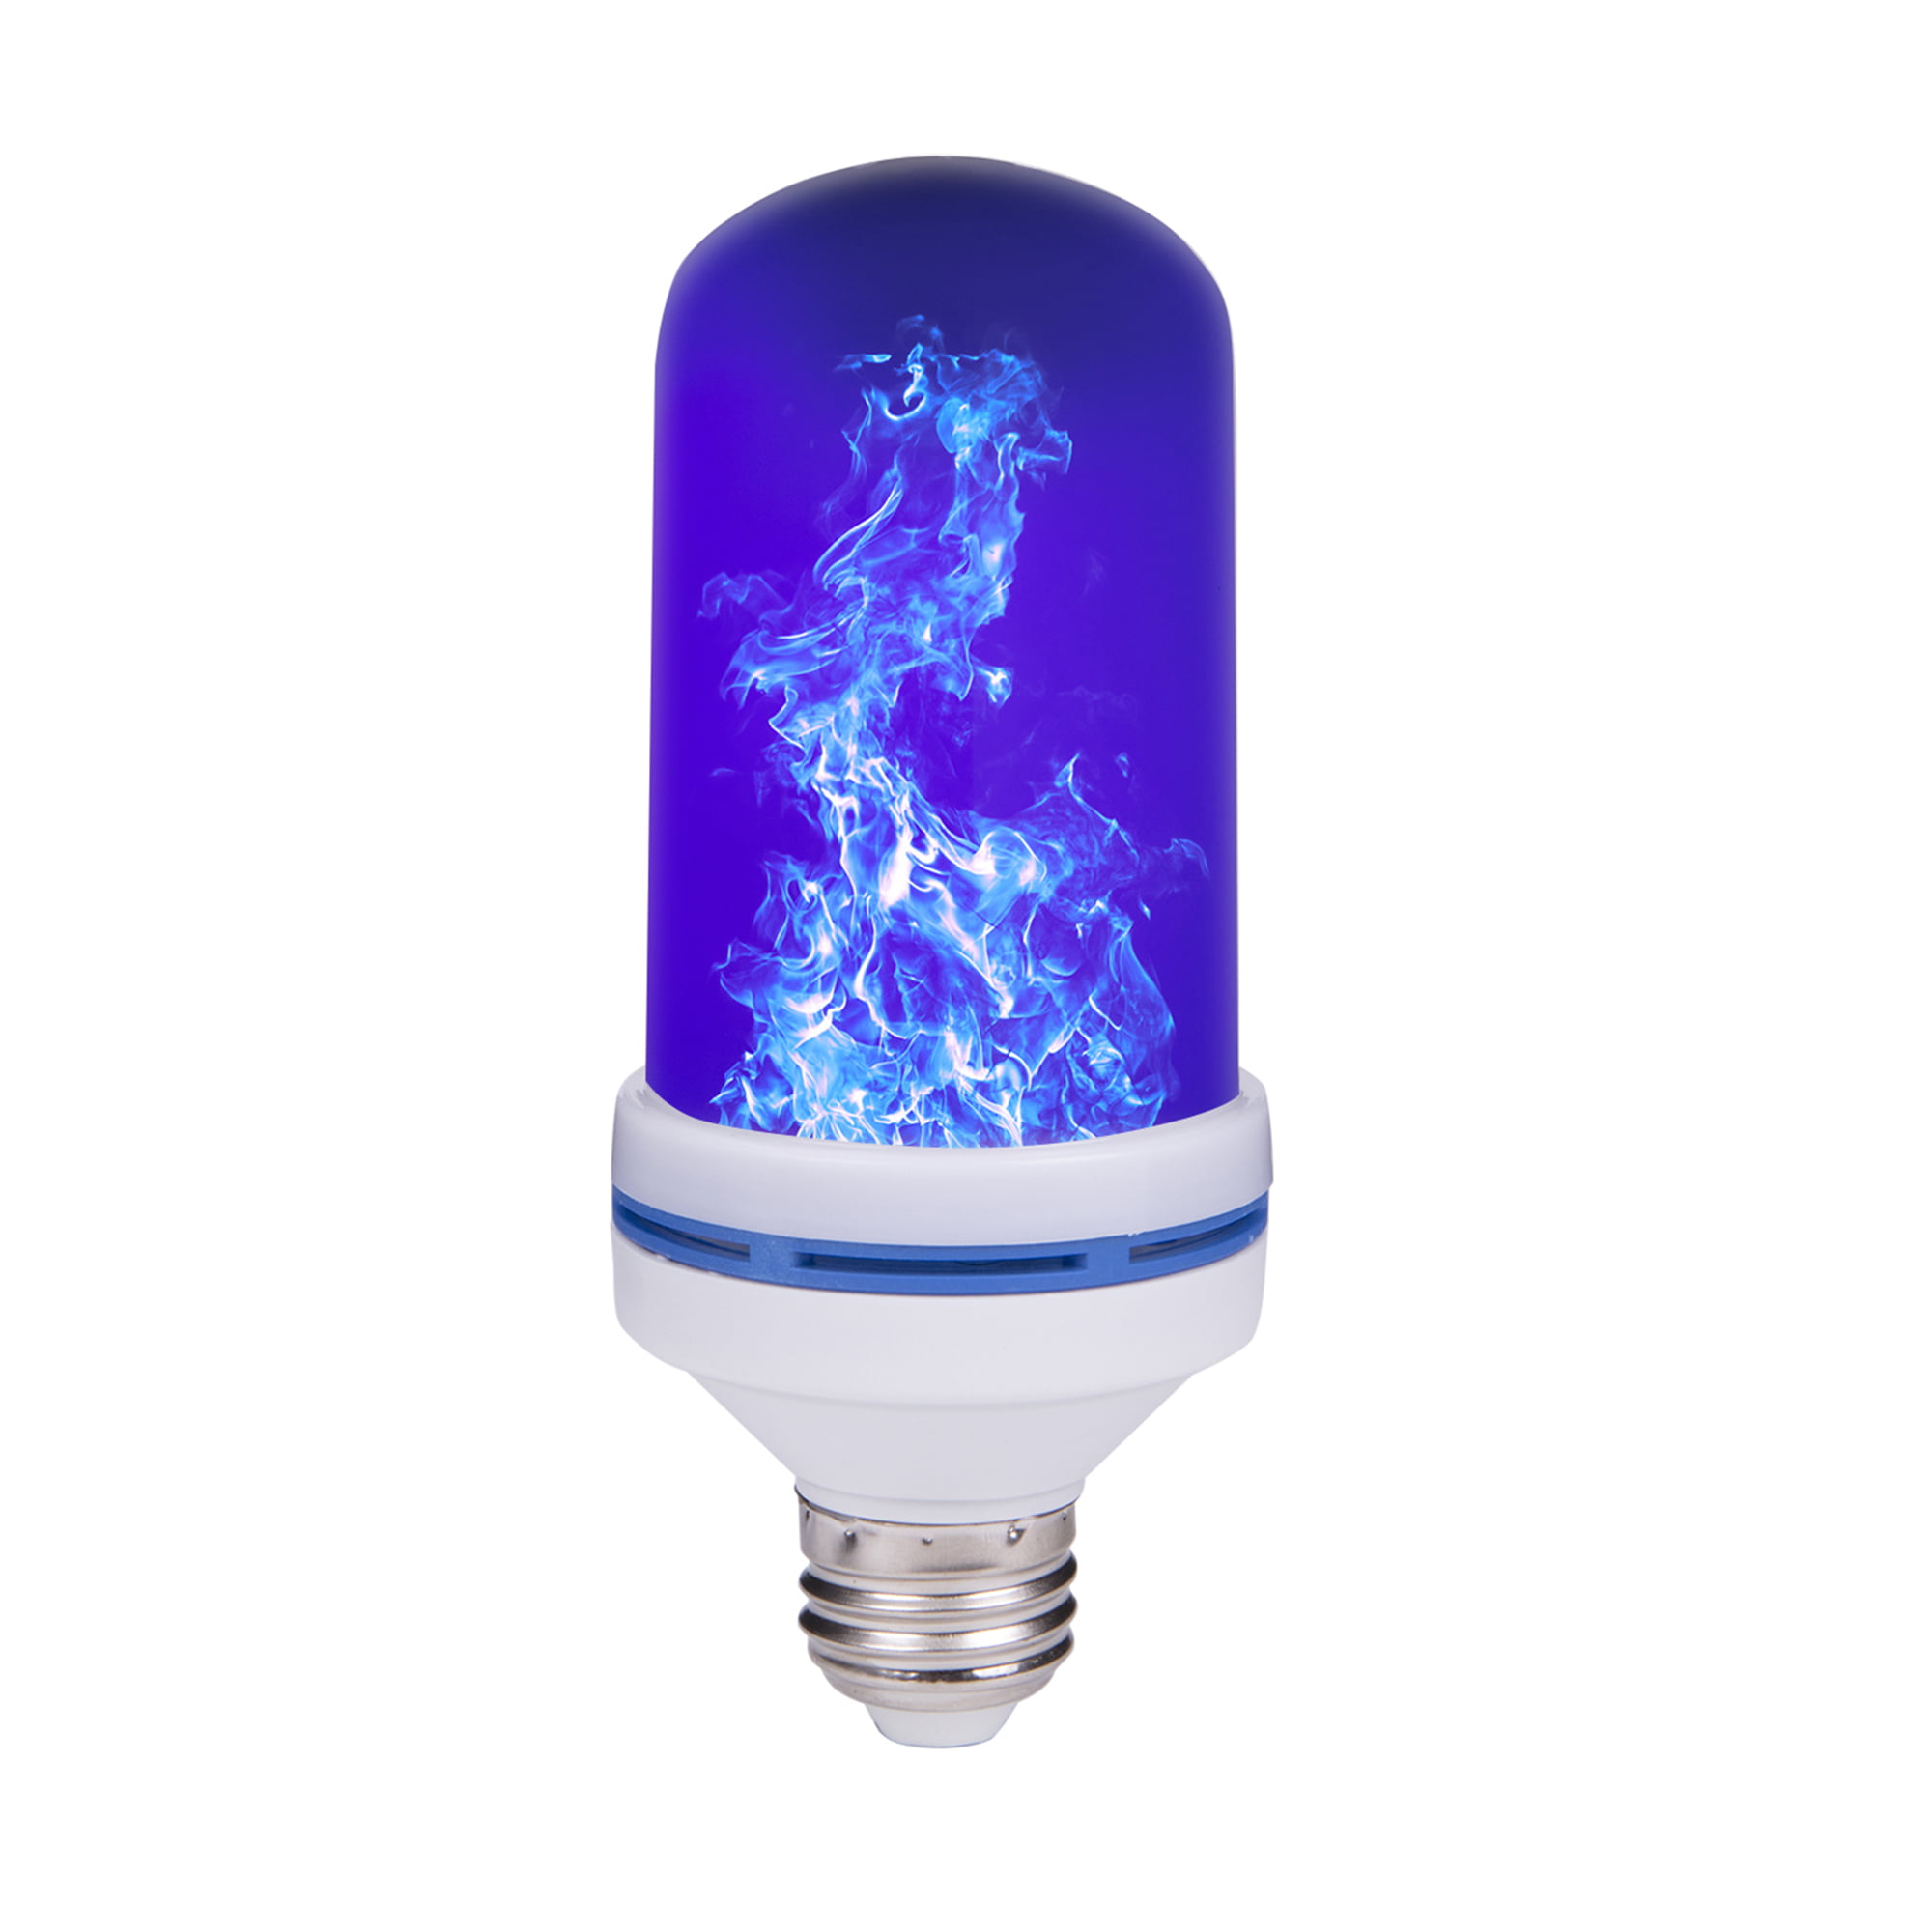 LED Flame Light Bulbs 7W 4 Modes Realistic Flickering E26 Standard Base Effect